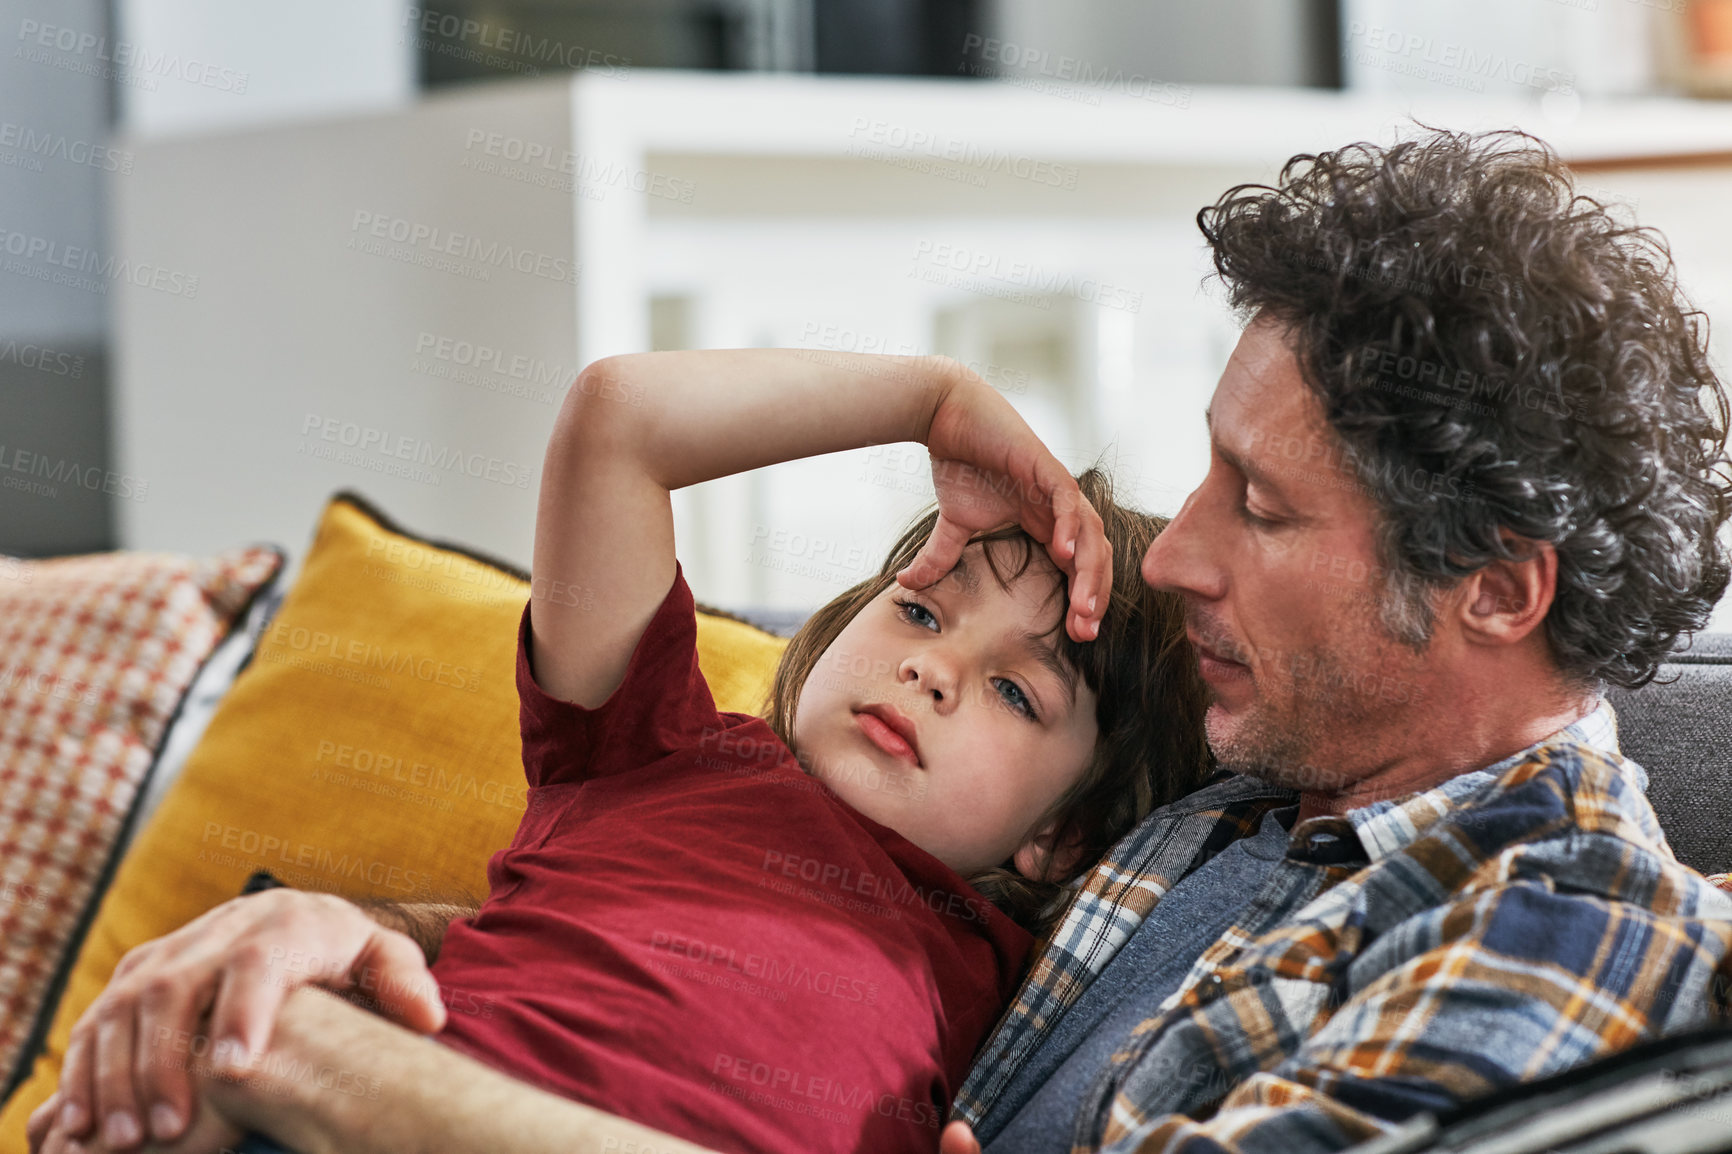 Buy stock photo Cropped shot of a mature father and his young son chilling on the sofa together at home